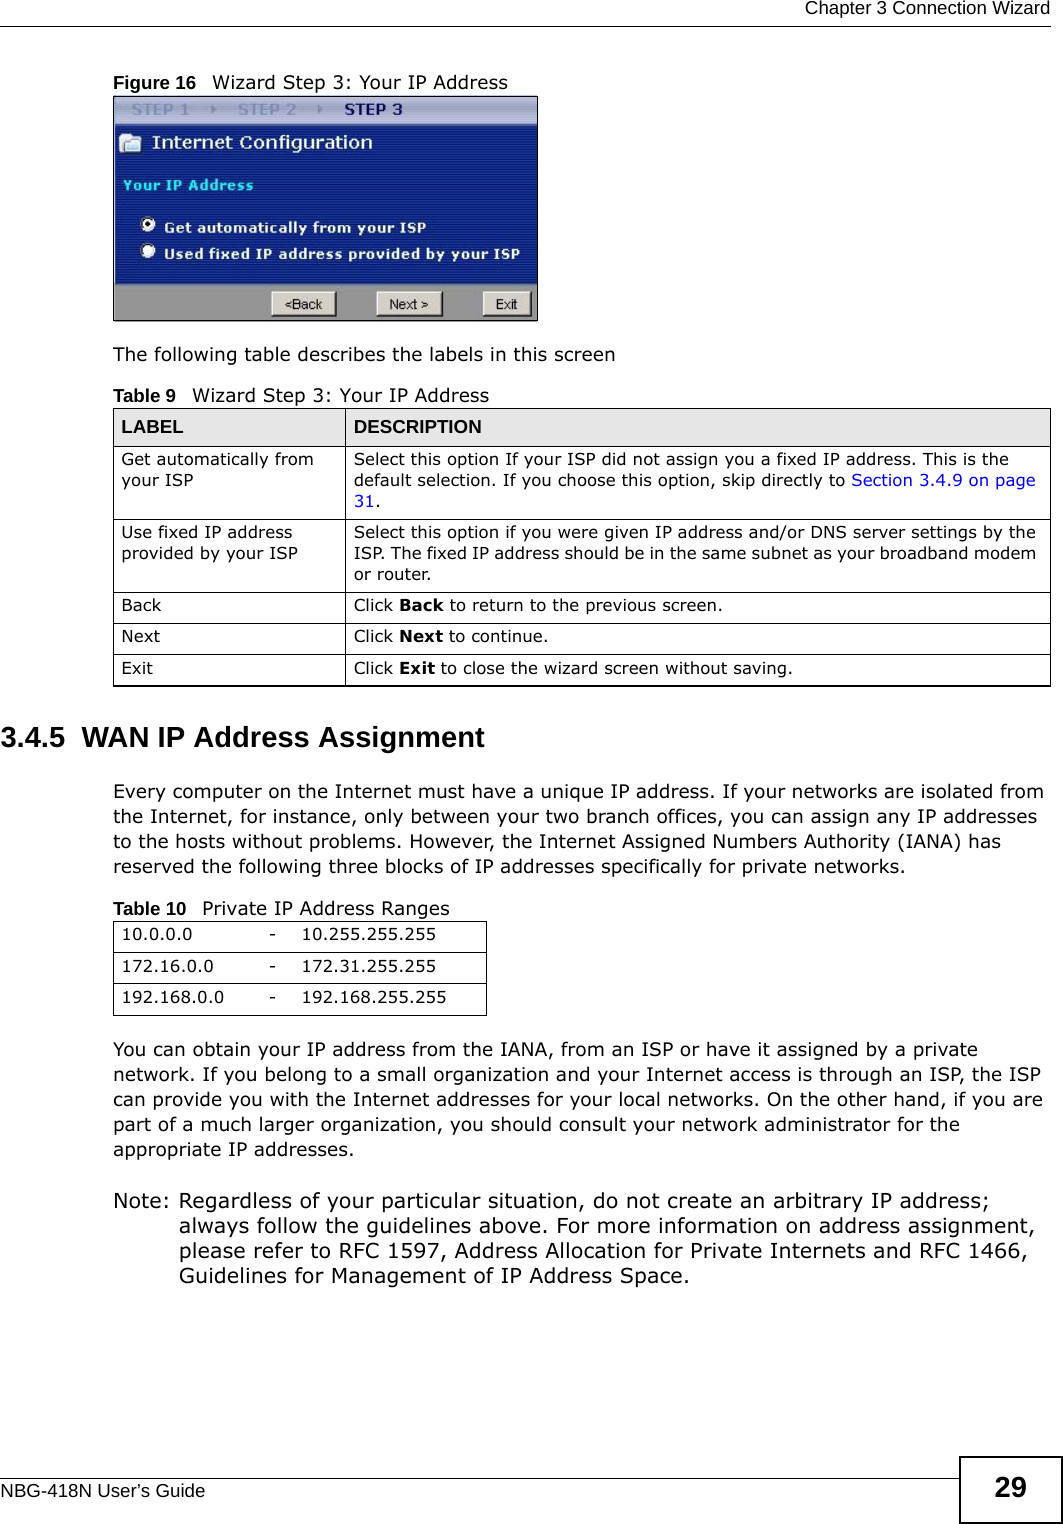  Chapter 3 Connection WizardNBG-418N User’s Guide 29Figure 16   Wizard Step 3: Your IP AddressThe following table describes the labels in this screen3.4.5  WAN IP Address AssignmentEvery computer on the Internet must have a unique IP address. If your networks are isolated from the Internet, for instance, only between your two branch offices, you can assign any IP addresses to the hosts without problems. However, the Internet Assigned Numbers Authority (IANA) has reserved the following three blocks of IP addresses specifically for private networks.You can obtain your IP address from the IANA, from an ISP or have it assigned by a private network. If you belong to a small organization and your Internet access is through an ISP, the ISP can provide you with the Internet addresses for your local networks. On the other hand, if you are part of a much larger organization, you should consult your network administrator for the appropriate IP addresses.Note: Regardless of your particular situation, do not create an arbitrary IP address; always follow the guidelines above. For more information on address assignment, please refer to RFC 1597, Address Allocation for Private Internets and RFC 1466, Guidelines for Management of IP Address Space.Table 9   Wizard Step 3: Your IP AddressLABEL DESCRIPTIONGet automatically from your ISP Select this option If your ISP did not assign you a fixed IP address. This is the default selection. If you choose this option, skip directly to Section 3.4.9 on page 31.Use fixed IP address provided by your ISPSelect this option if you were given IP address and/or DNS server settings by the ISP. The fixed IP address should be in the same subnet as your broadband modem or router. Back Click Back to return to the previous screen.Next Click Next to continue. Exit Click Exit to close the wizard screen without saving.Table 10   Private IP Address Ranges10.0.0.0 -10.255.255.255172.16.0.0 -172.31.255.255192.168.0.0 -192.168.255.255